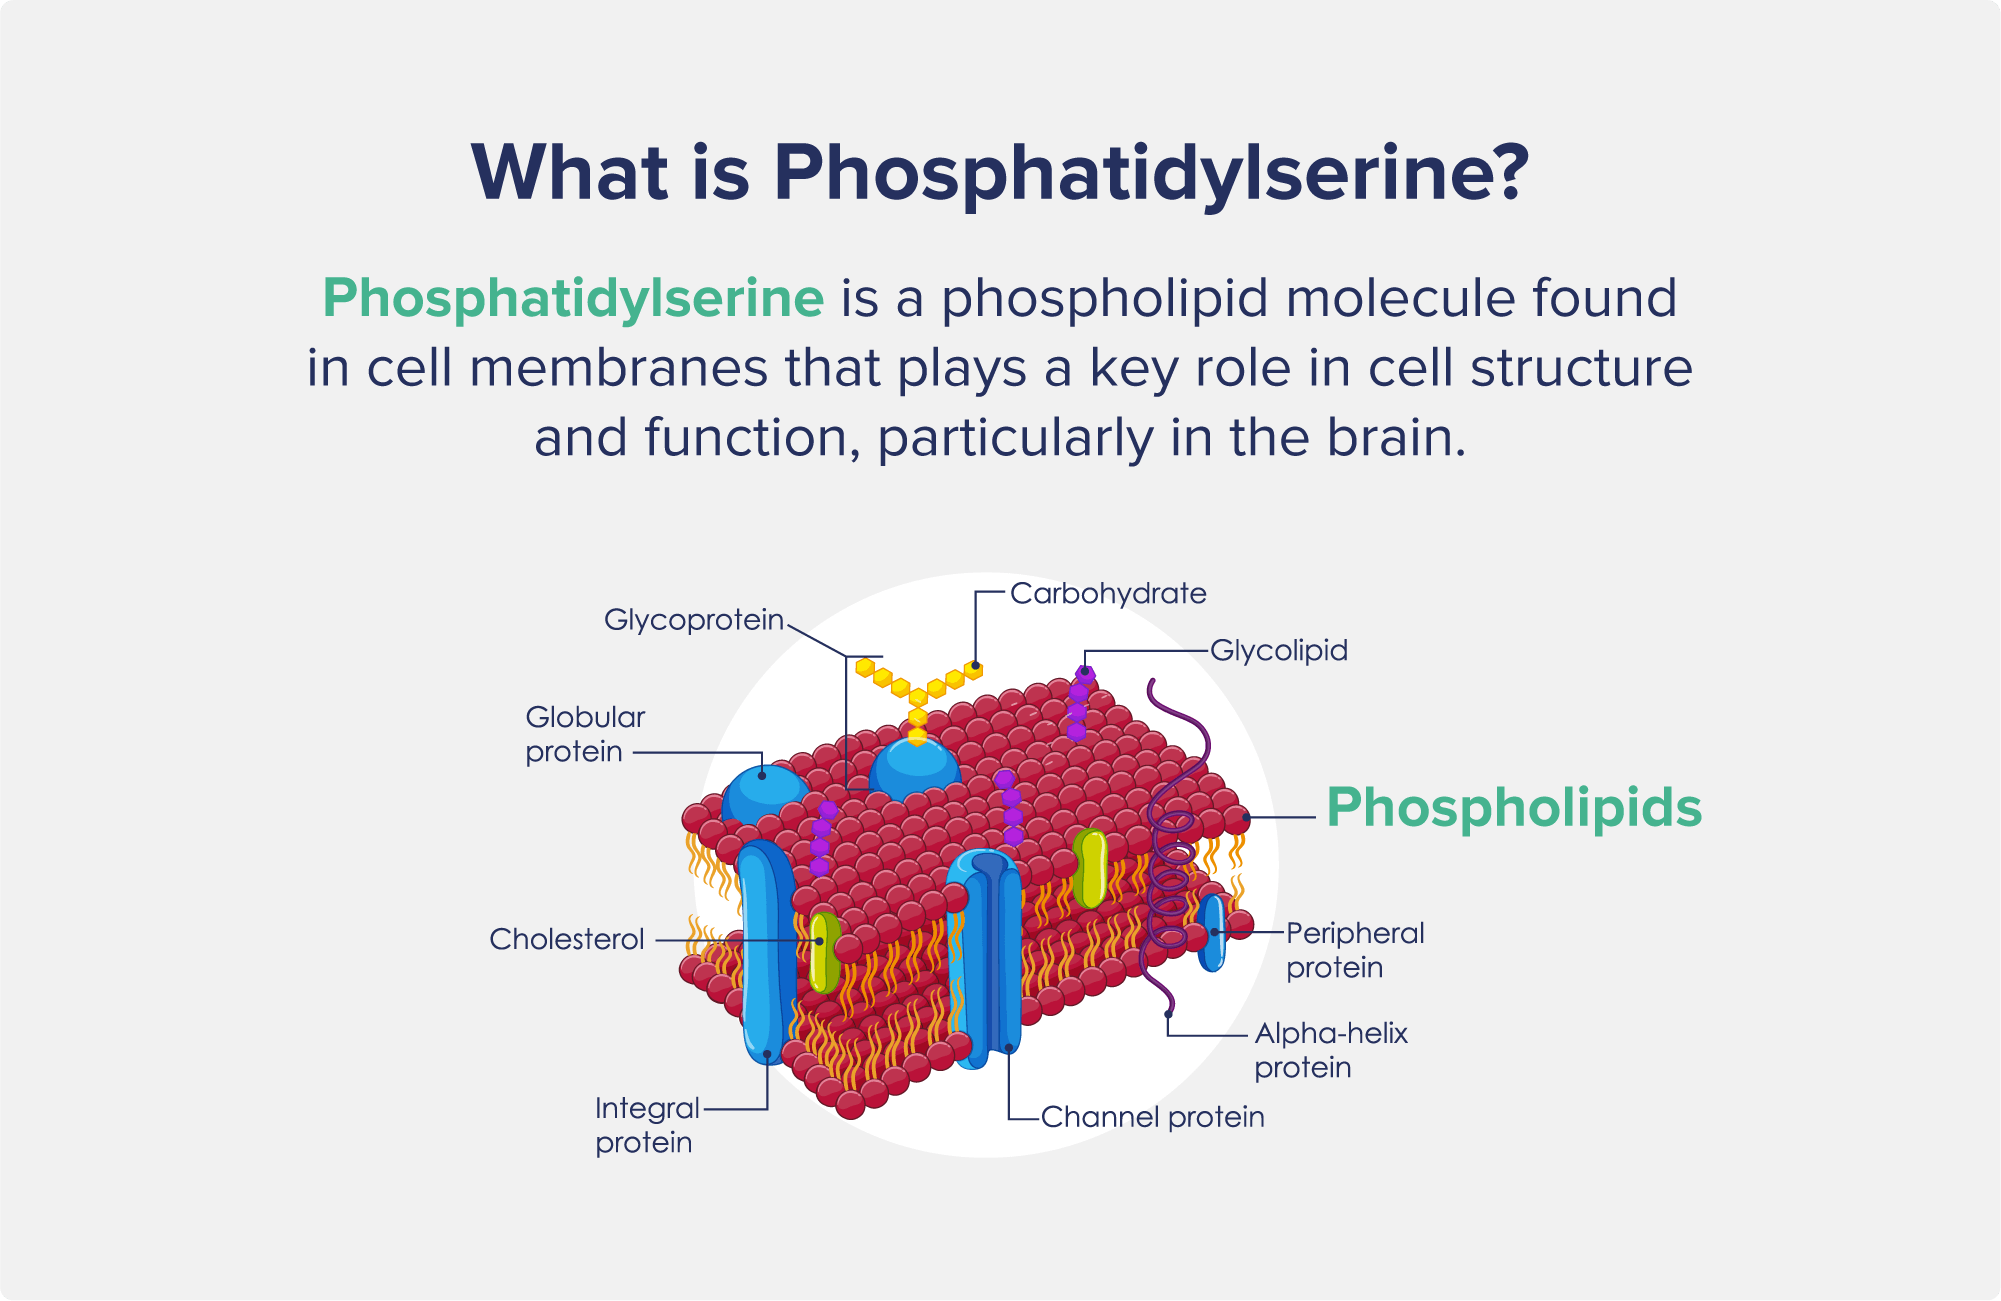 A graphic entitled "What is Phosphatidylserine?" with a picture of a phosphatidylserine cell, including labeled components.